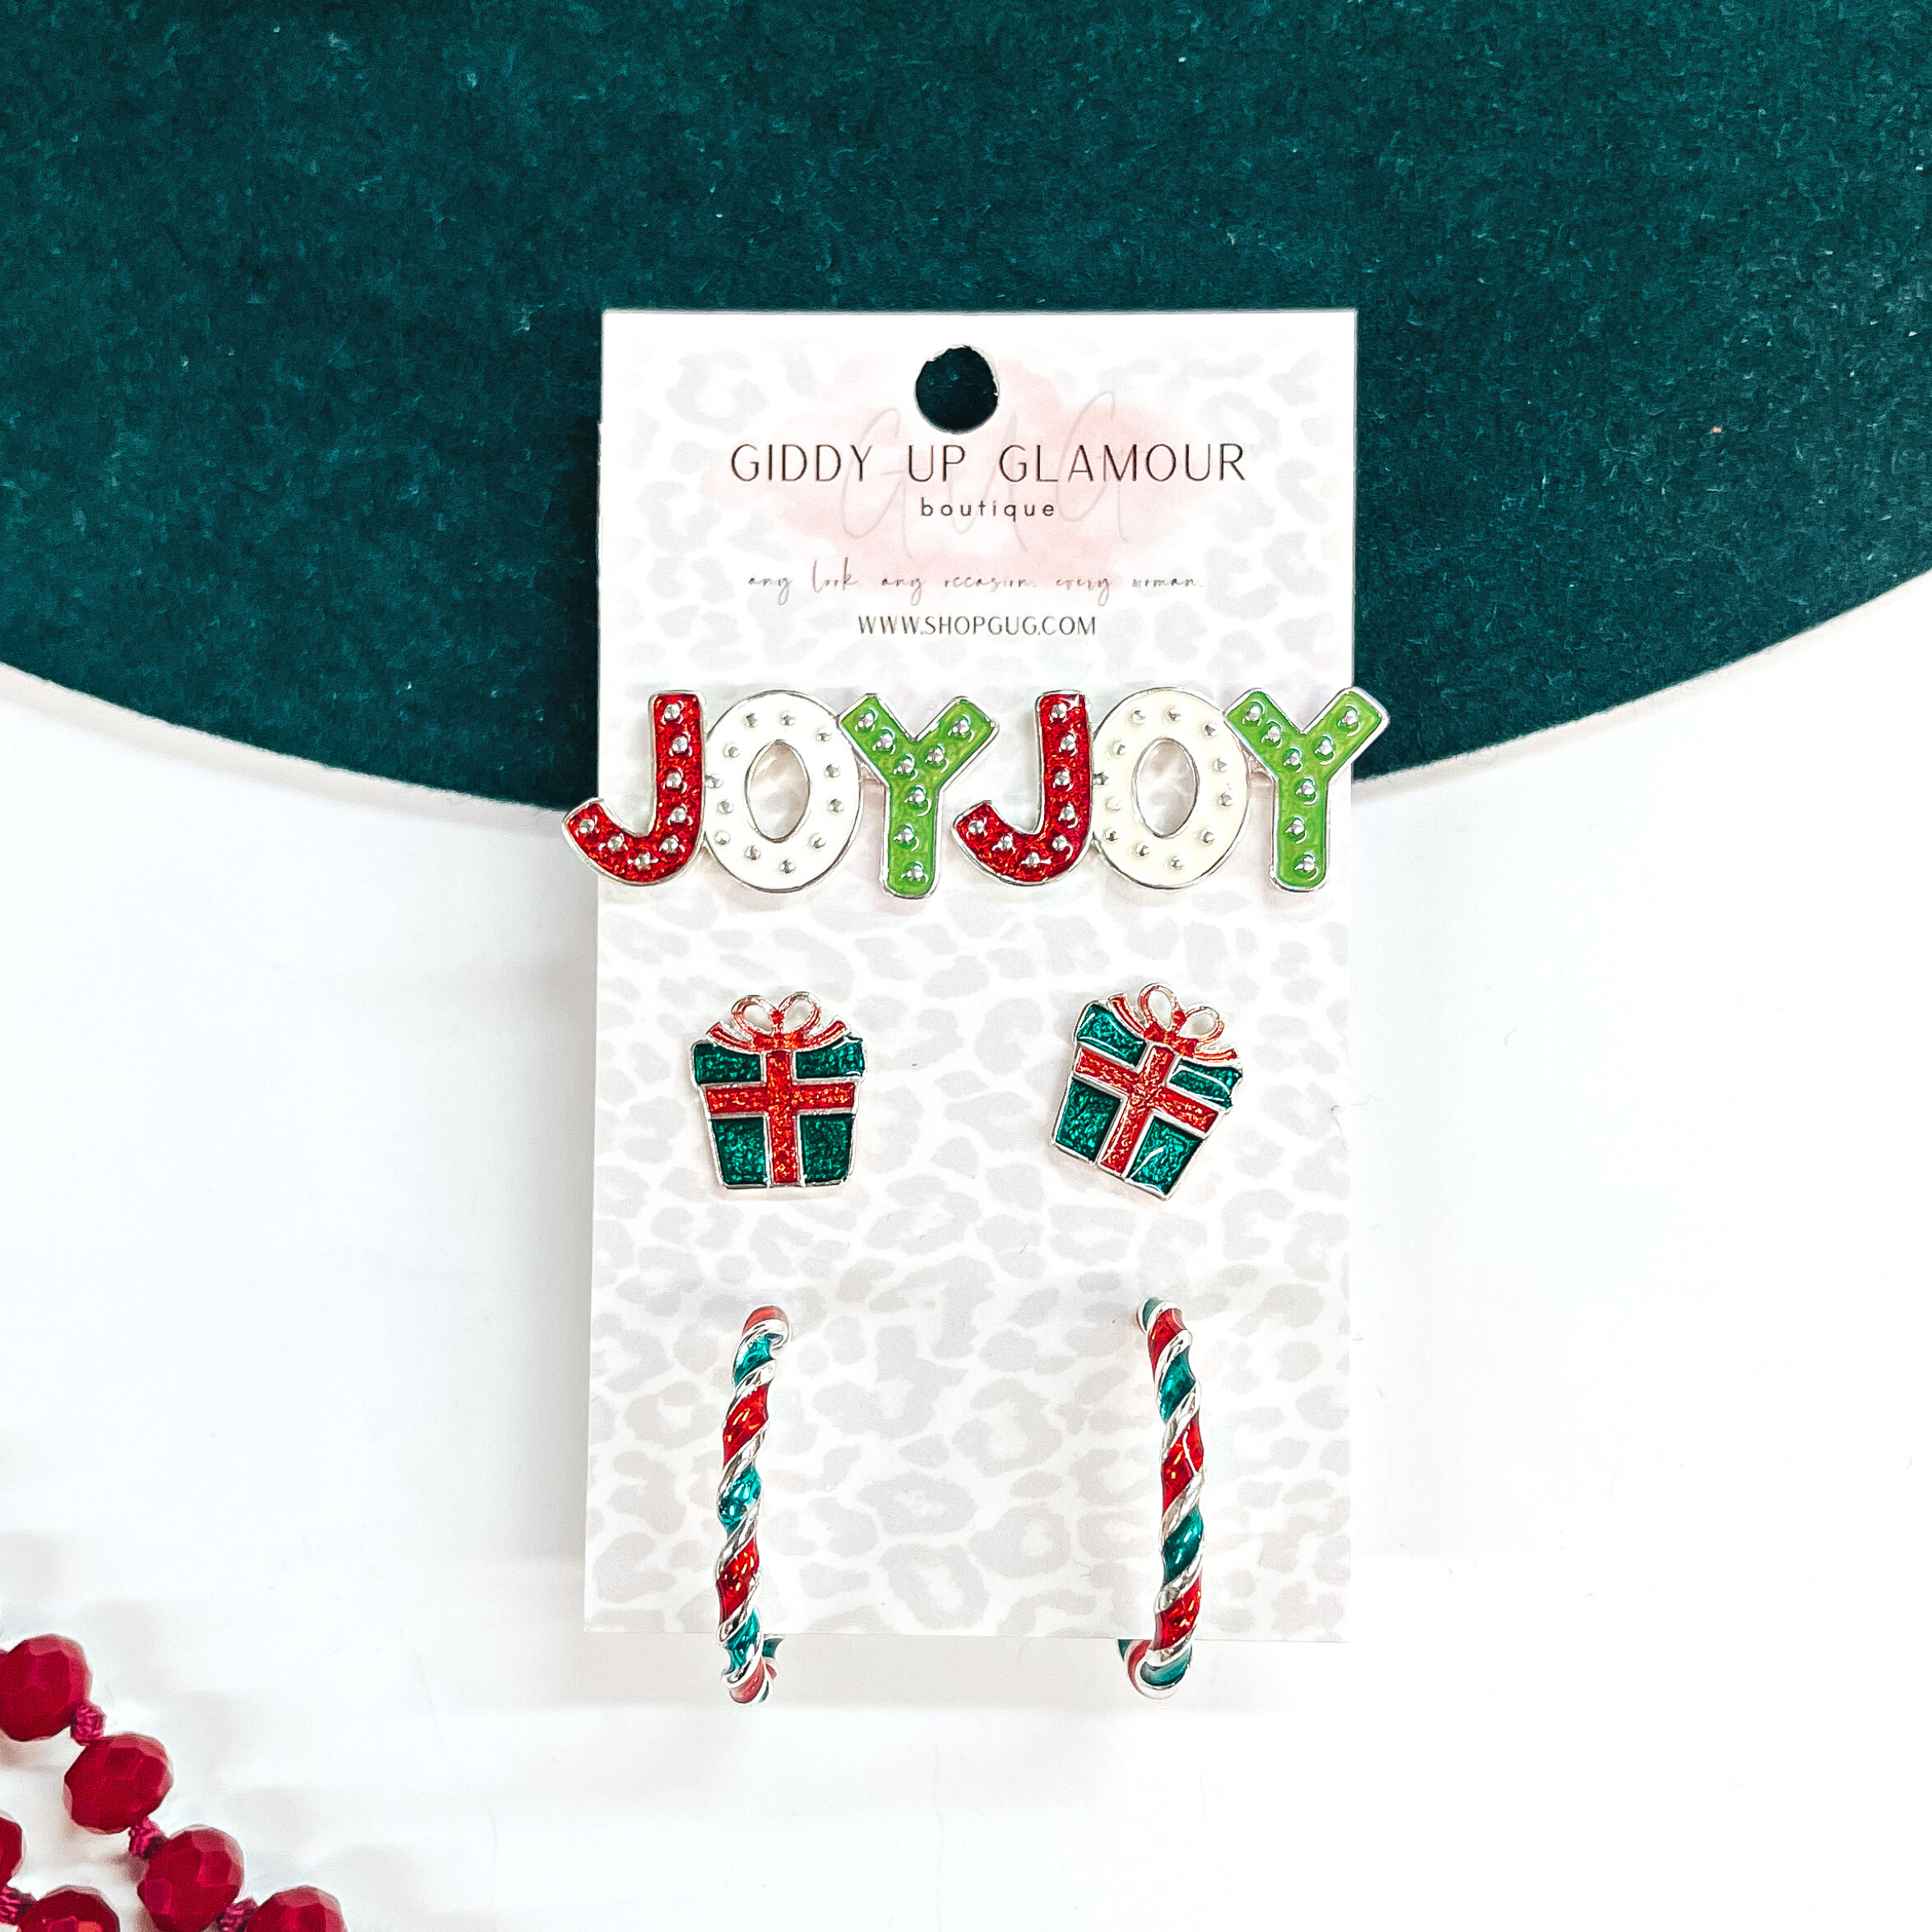 This is a set of three earrings in green, red, and white. From top to bottom;  Joy studs in red, white, and light green with small silver dots all over. The  middle pair are christmas presents in red and dark green. The bottom  earrings are small/medium twised hoops in red, gree, and silver. These  earrings are placed on a Giddy Up Glamour card, they are laying on a dark  green felt hat brim and white background with red beads in the corner as decor.